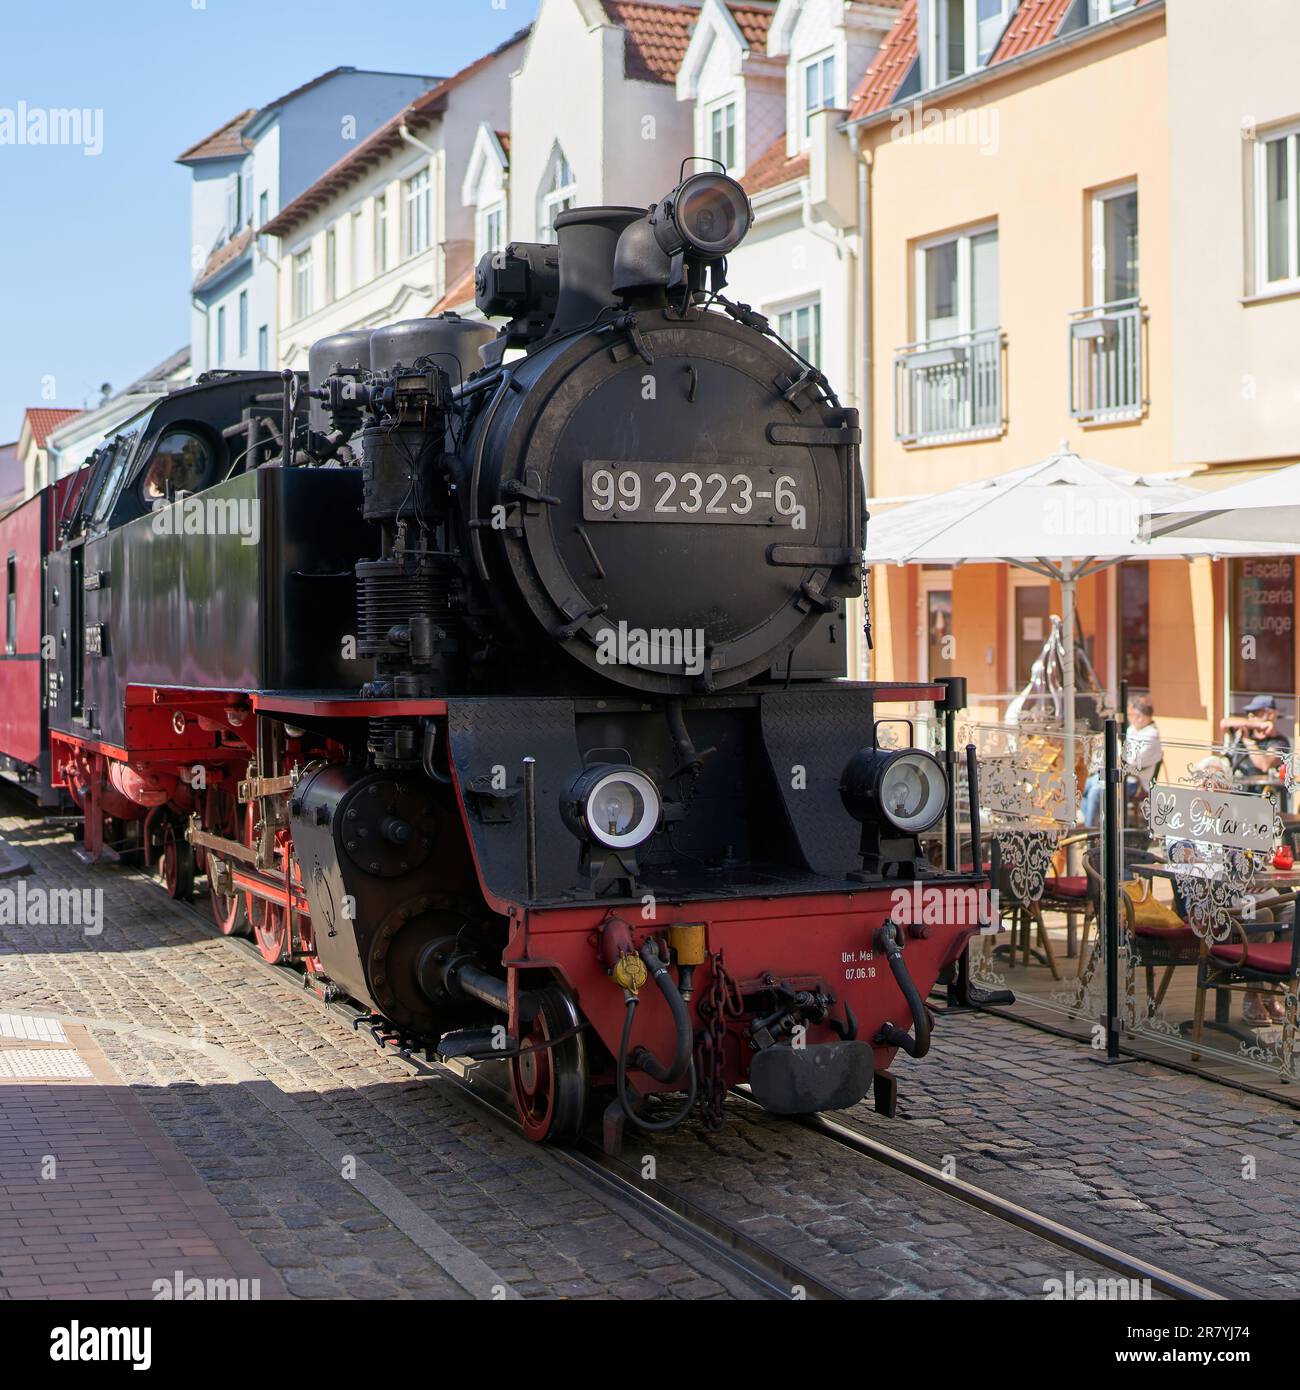 Passenger train of the tourist train Molli during your journey through the old town of Bad Doberan at the German Baltic Sea Stock Photo